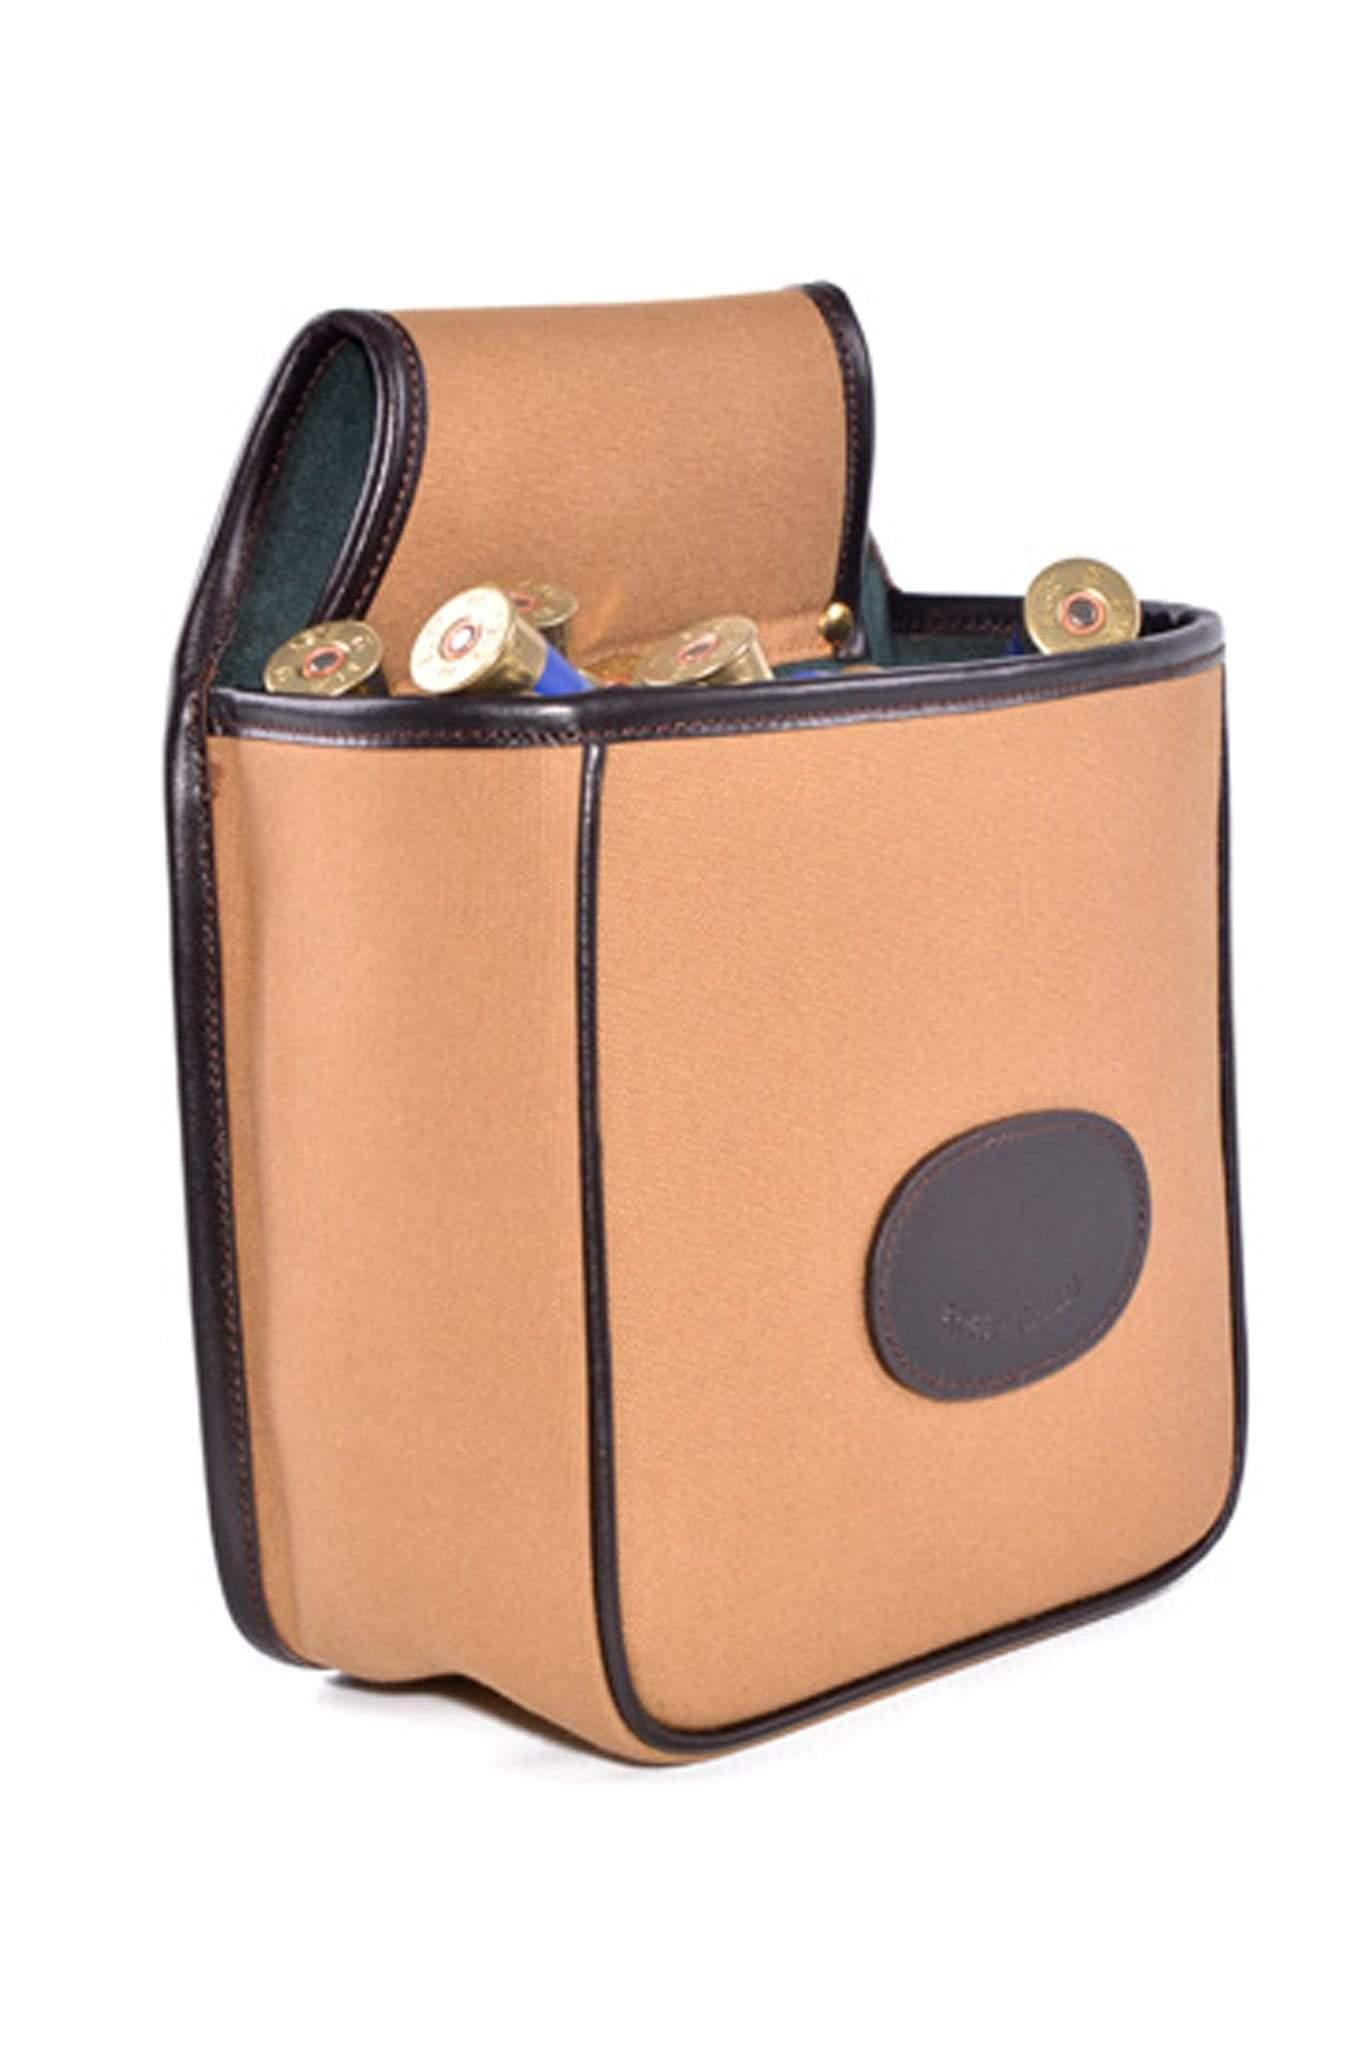 Robey &amp; Green Gun Accessories Robey &amp; Green Glebe Canvas and Leather Open Top Cartridge Bag (Pouch)